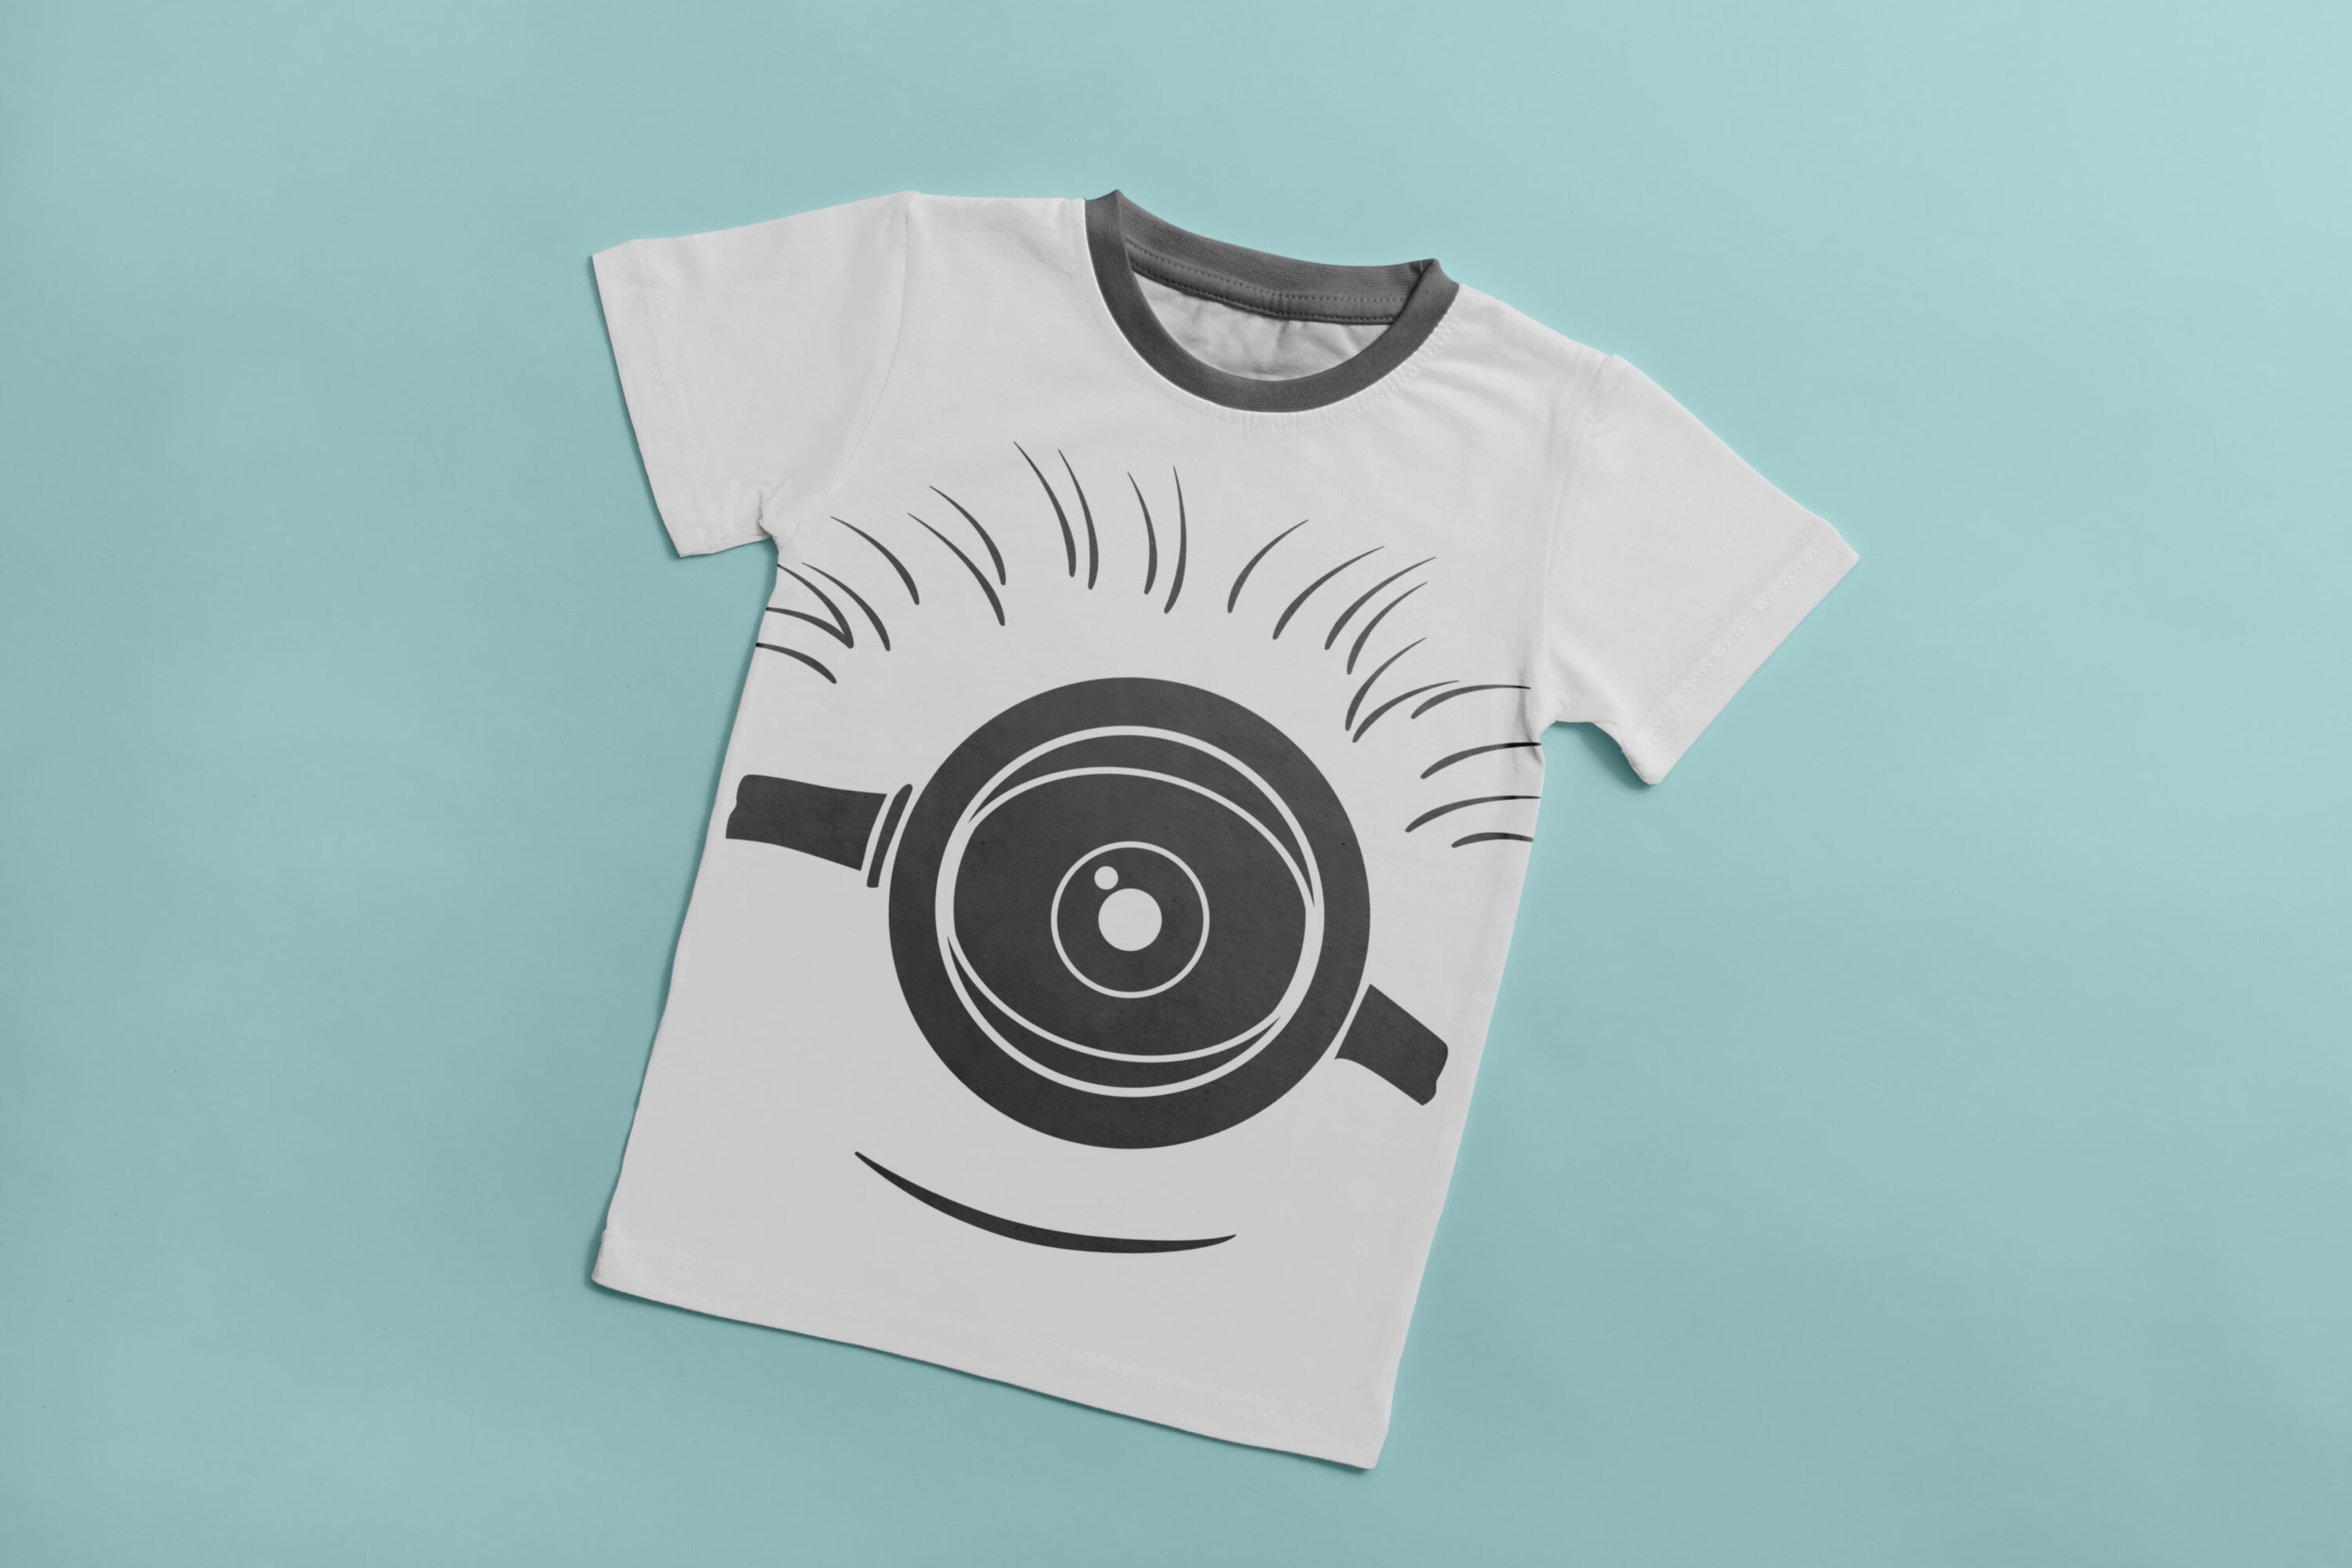 A white T-shirt with a gray collar and a gray silhouette of a happy minion.